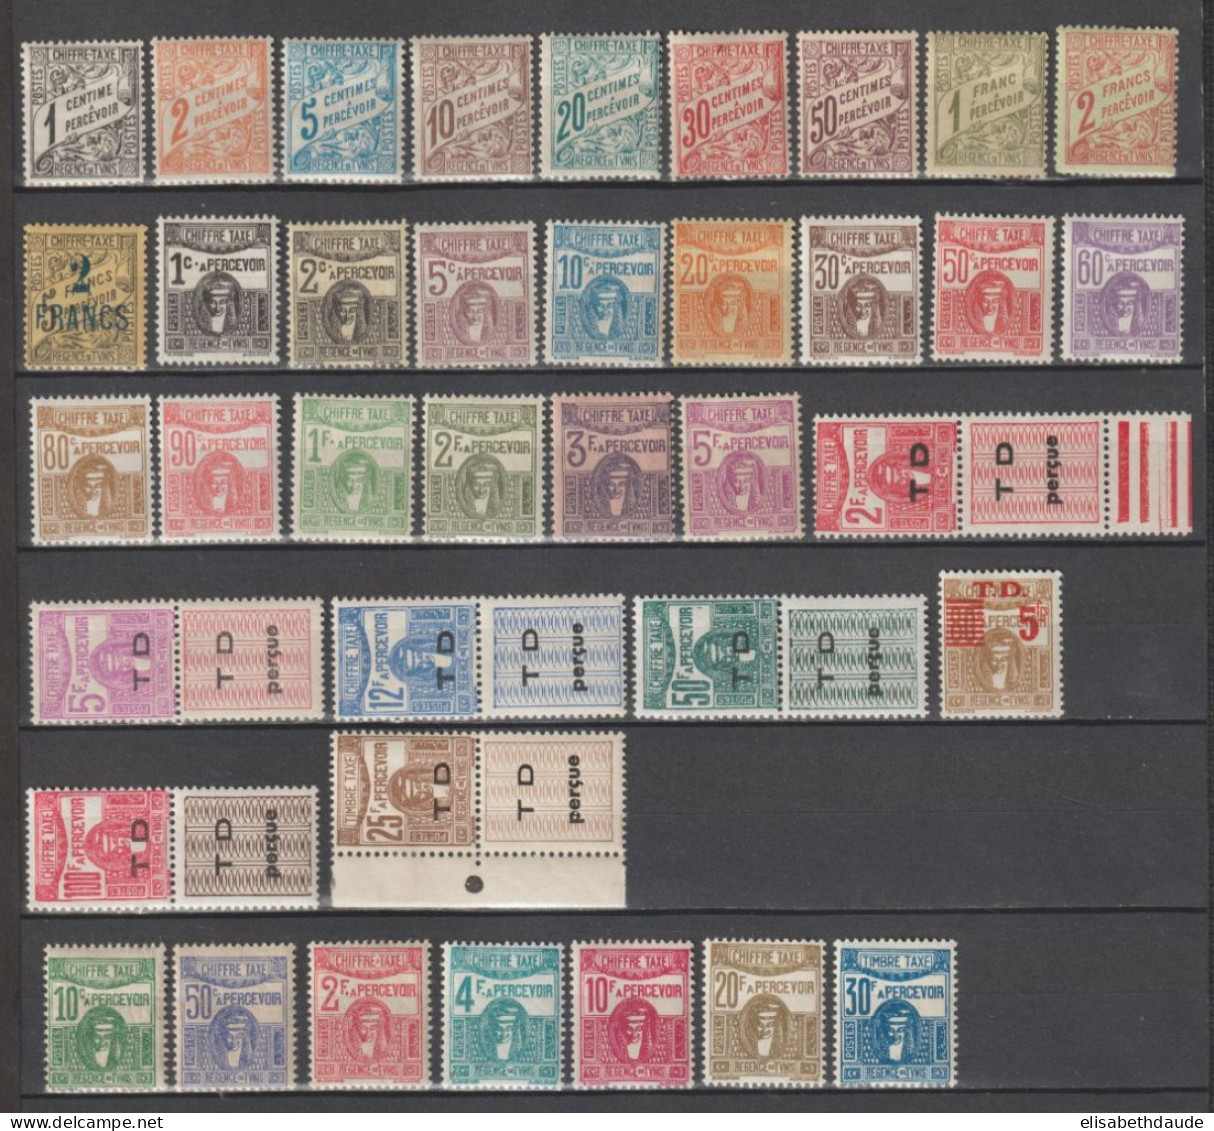 TUNISIE - 1901/1945 - TAXE PRESQUE COMPLET - YVERT 26/34+36/50+52+54/65 * MH (PLUPART MLH !) - COTE = 62.25 EUR. - - Timbres-taxe